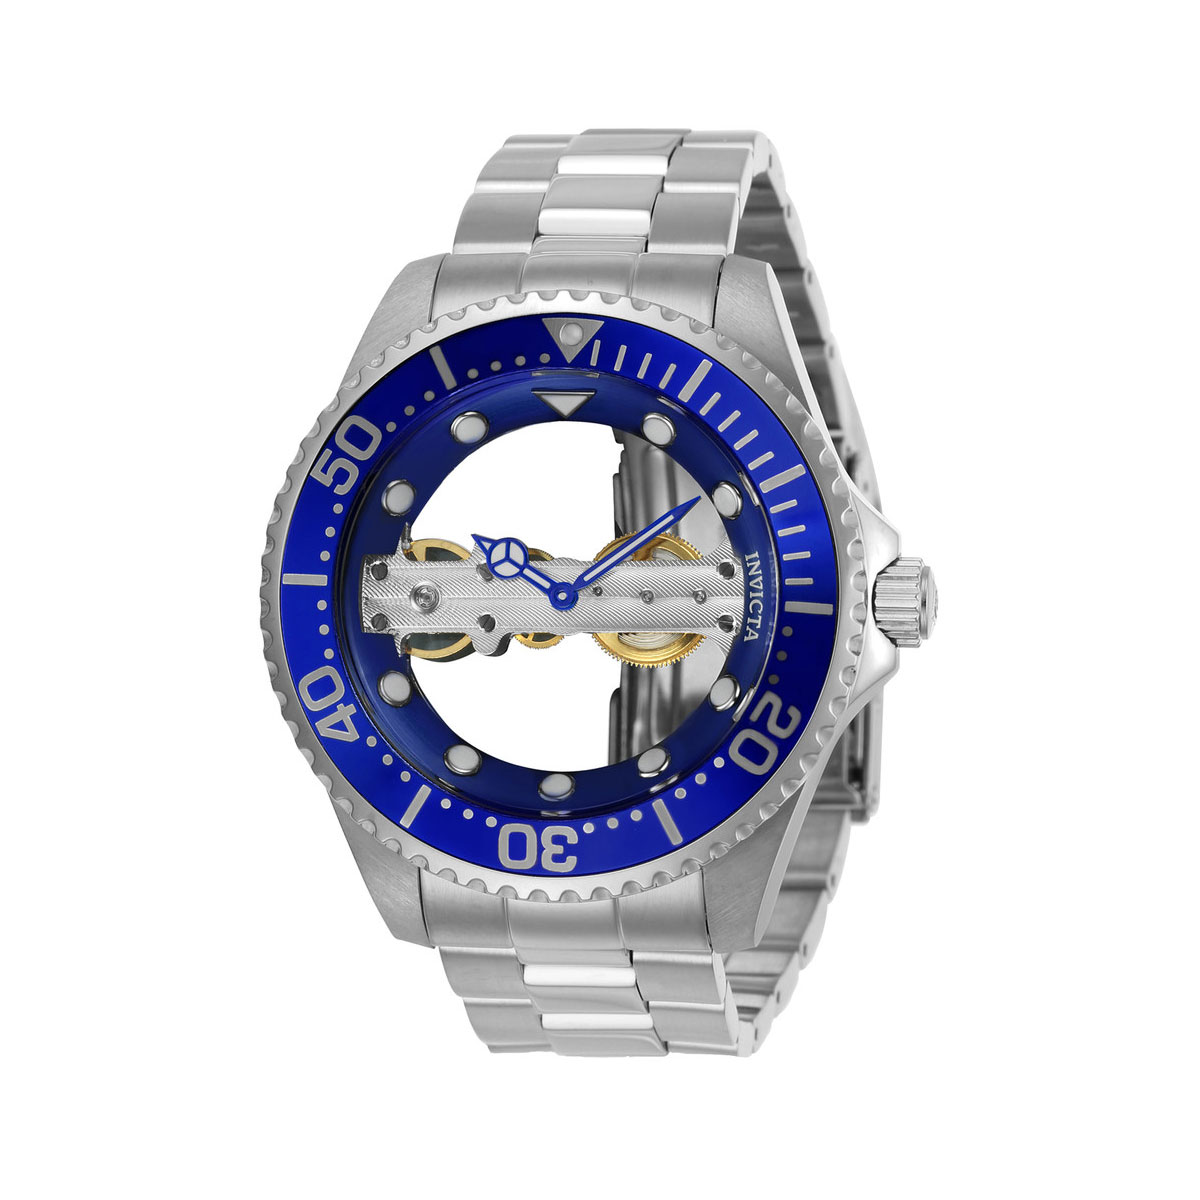 Invicta Men's 24693 Pro Diver Mechanical Multifunction Blue Dial Watch